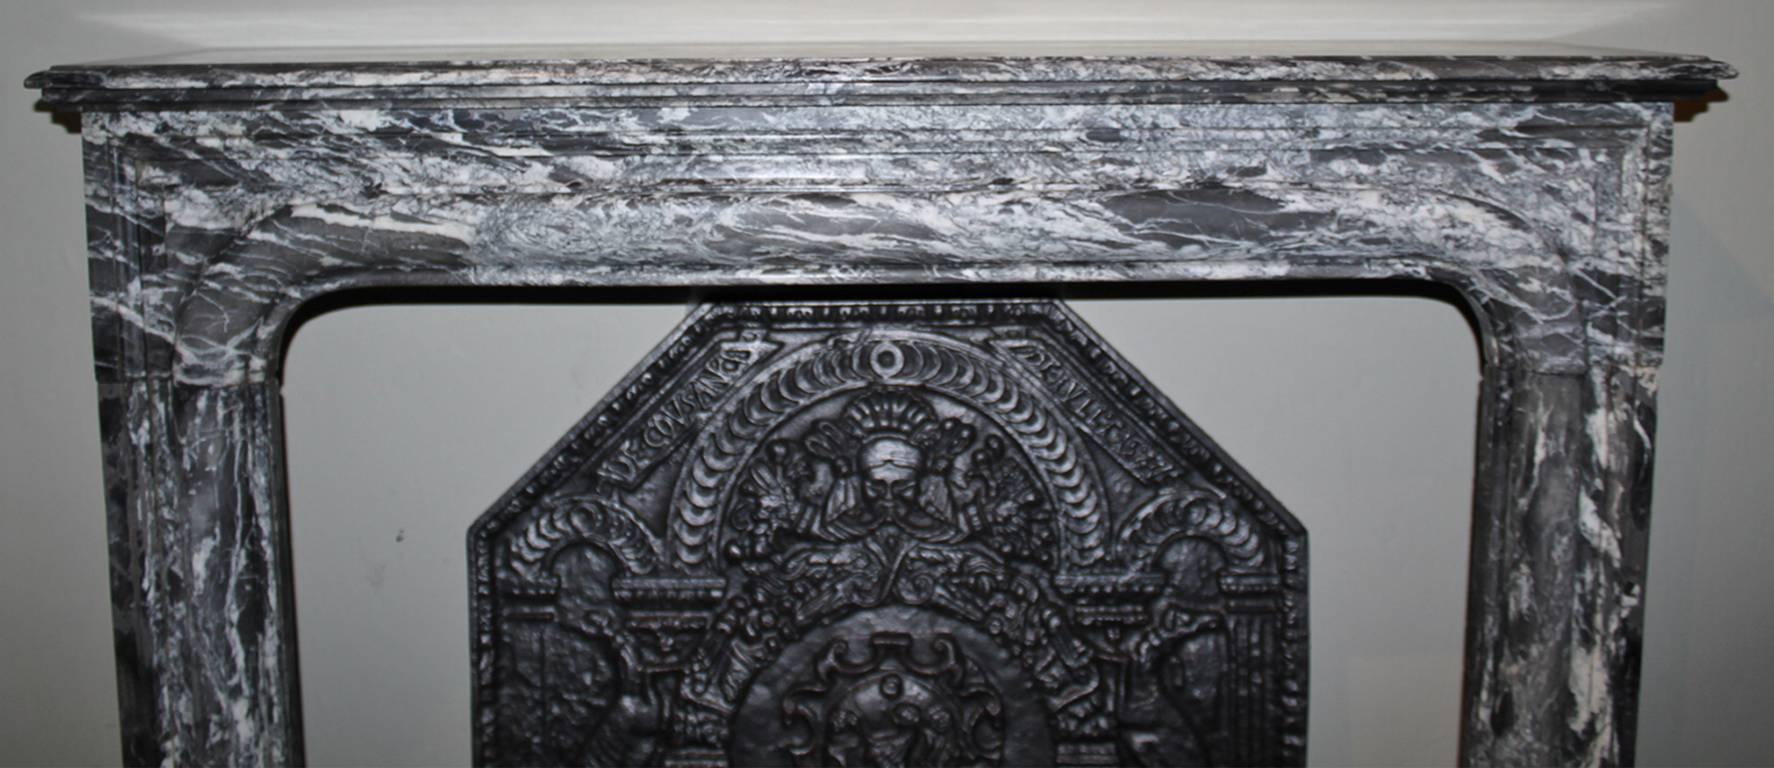 European Antique Black Marble Fireplace mantel from the 19th Century